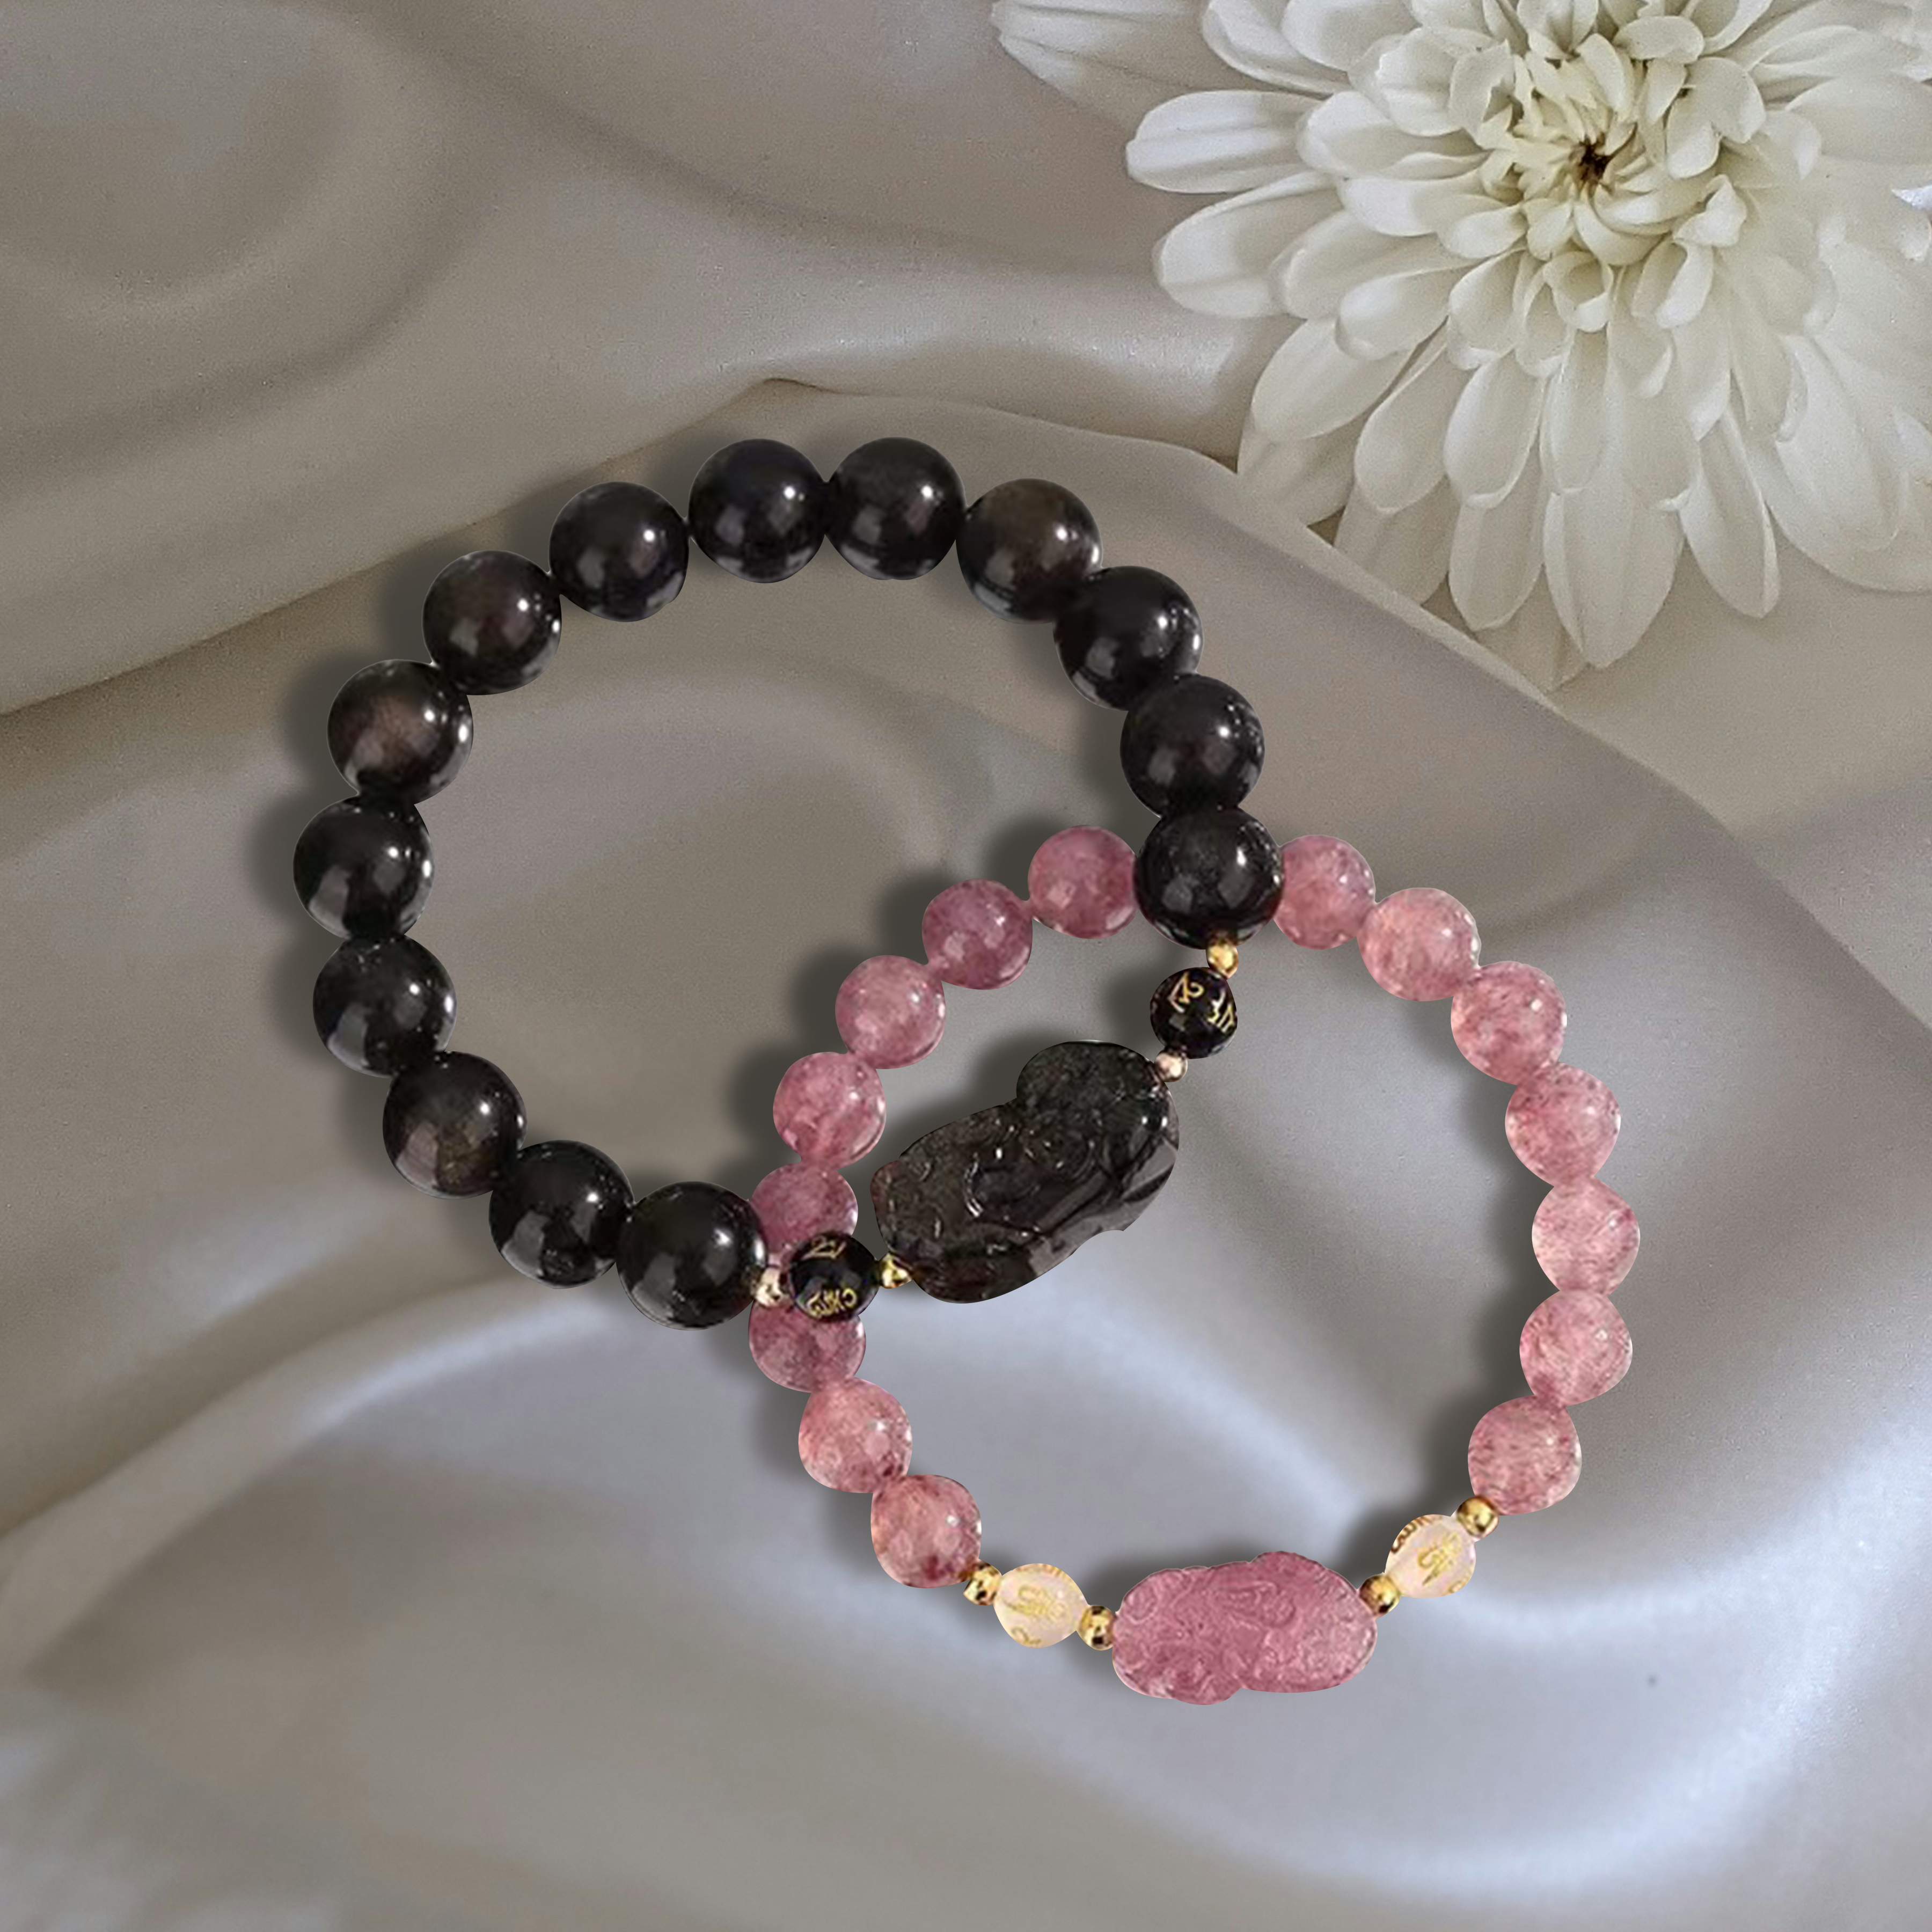 Lucklumen Pixiu Strawberry Crystal Obsidian Bracelet To Attract Good Luck And Wealth